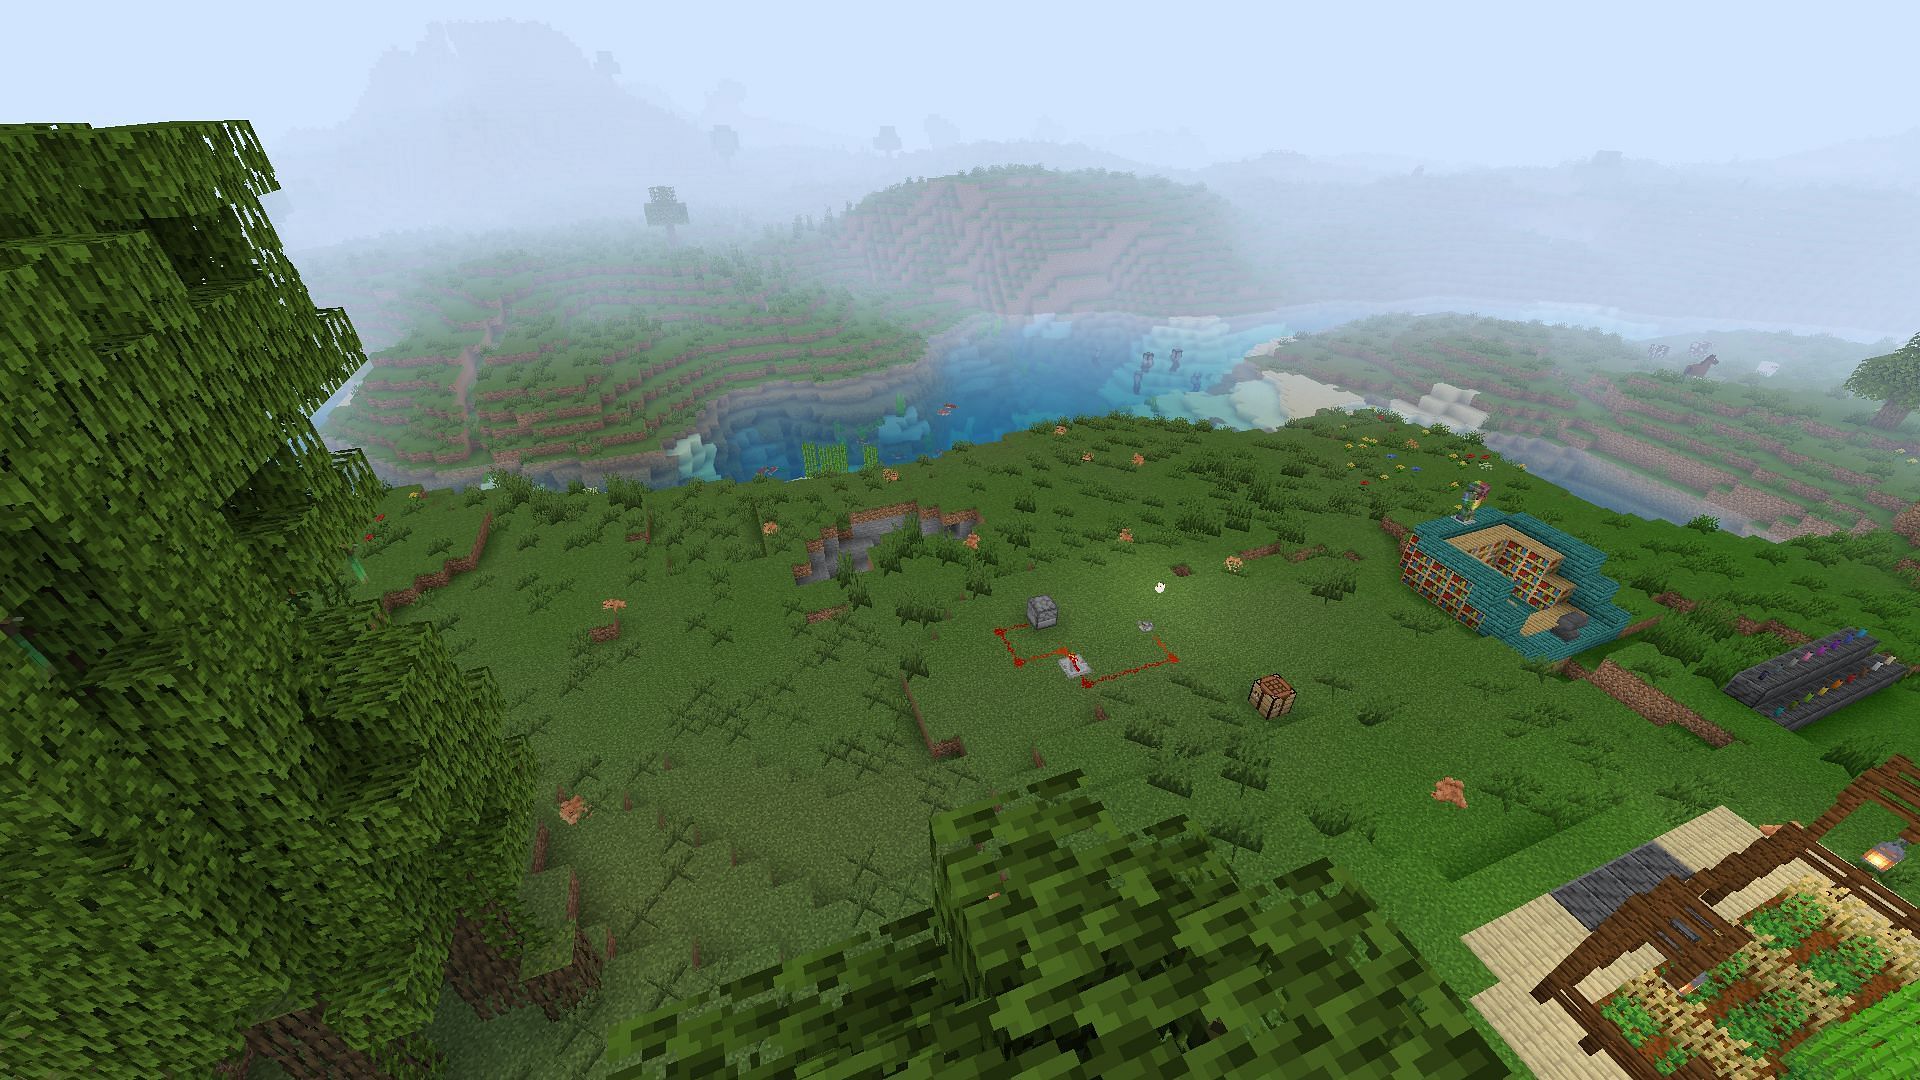 The example area with BQL shaders applied (Image via Minecraft)